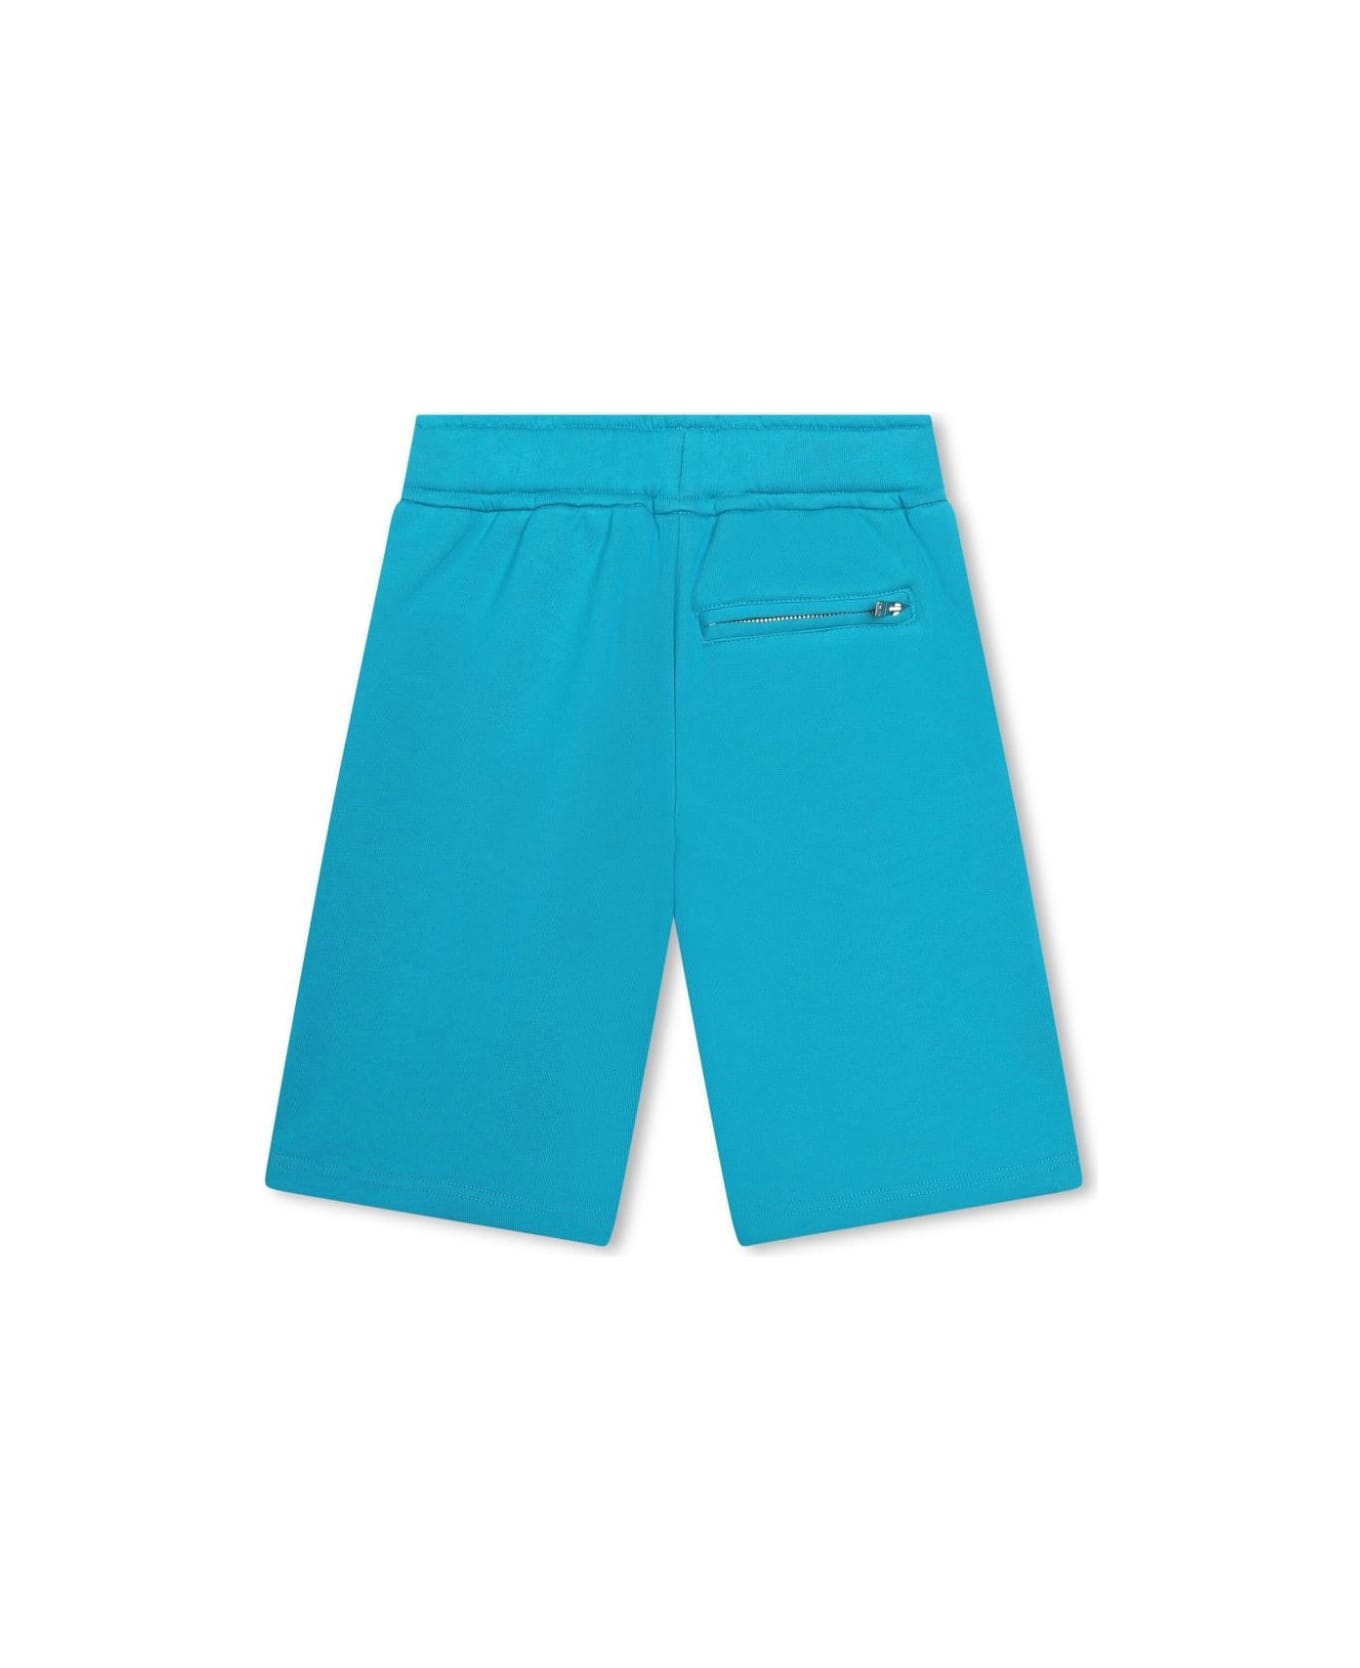 Lanvin Turquoise Shorts With Logo And "curb" Motif - Blue ボトムス